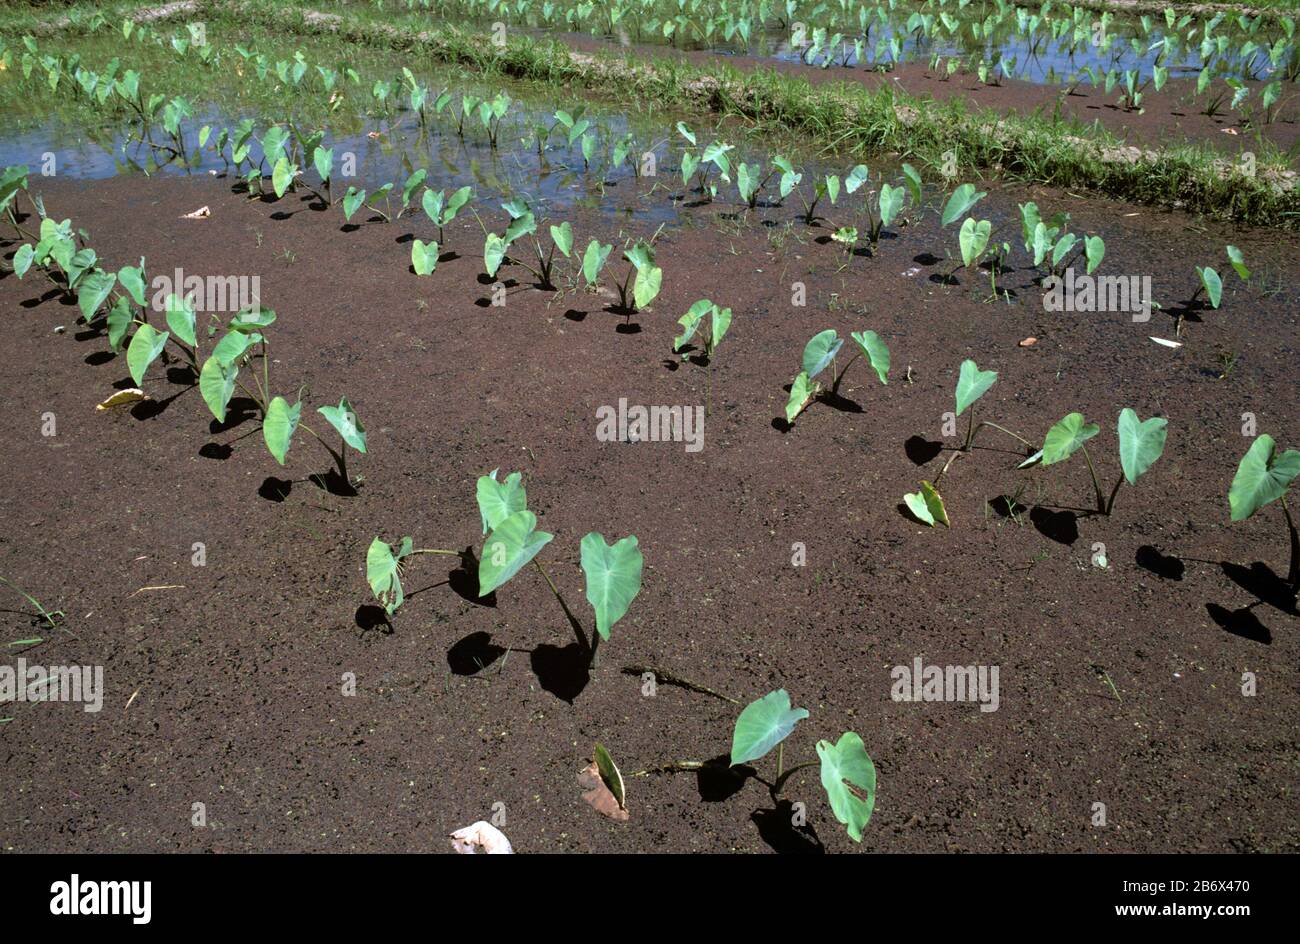 Taro, dasheen, or cocoyam (Colocasia esculenta var. antiquorum) young root vegetable plants in a paddy, Luzon, Philippines, February Stock Photo